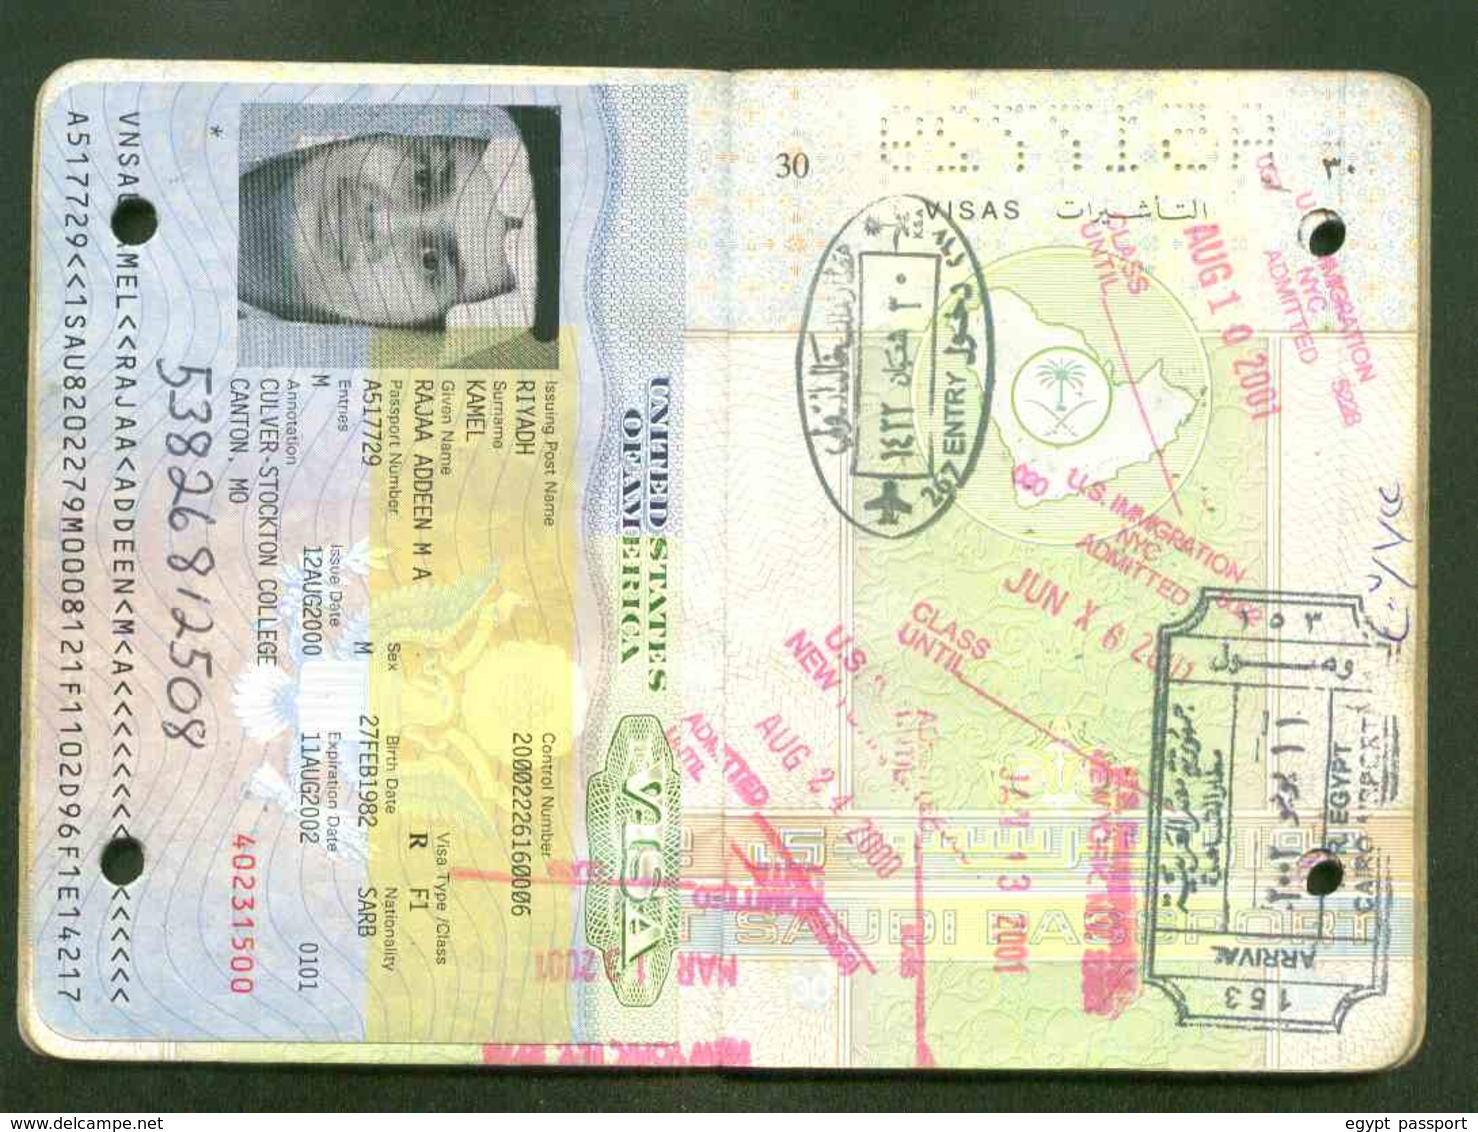 Saudi Arabia expired passport issue 1997 - Cancelled by Two punching holes through the passport - Condition as in Scan